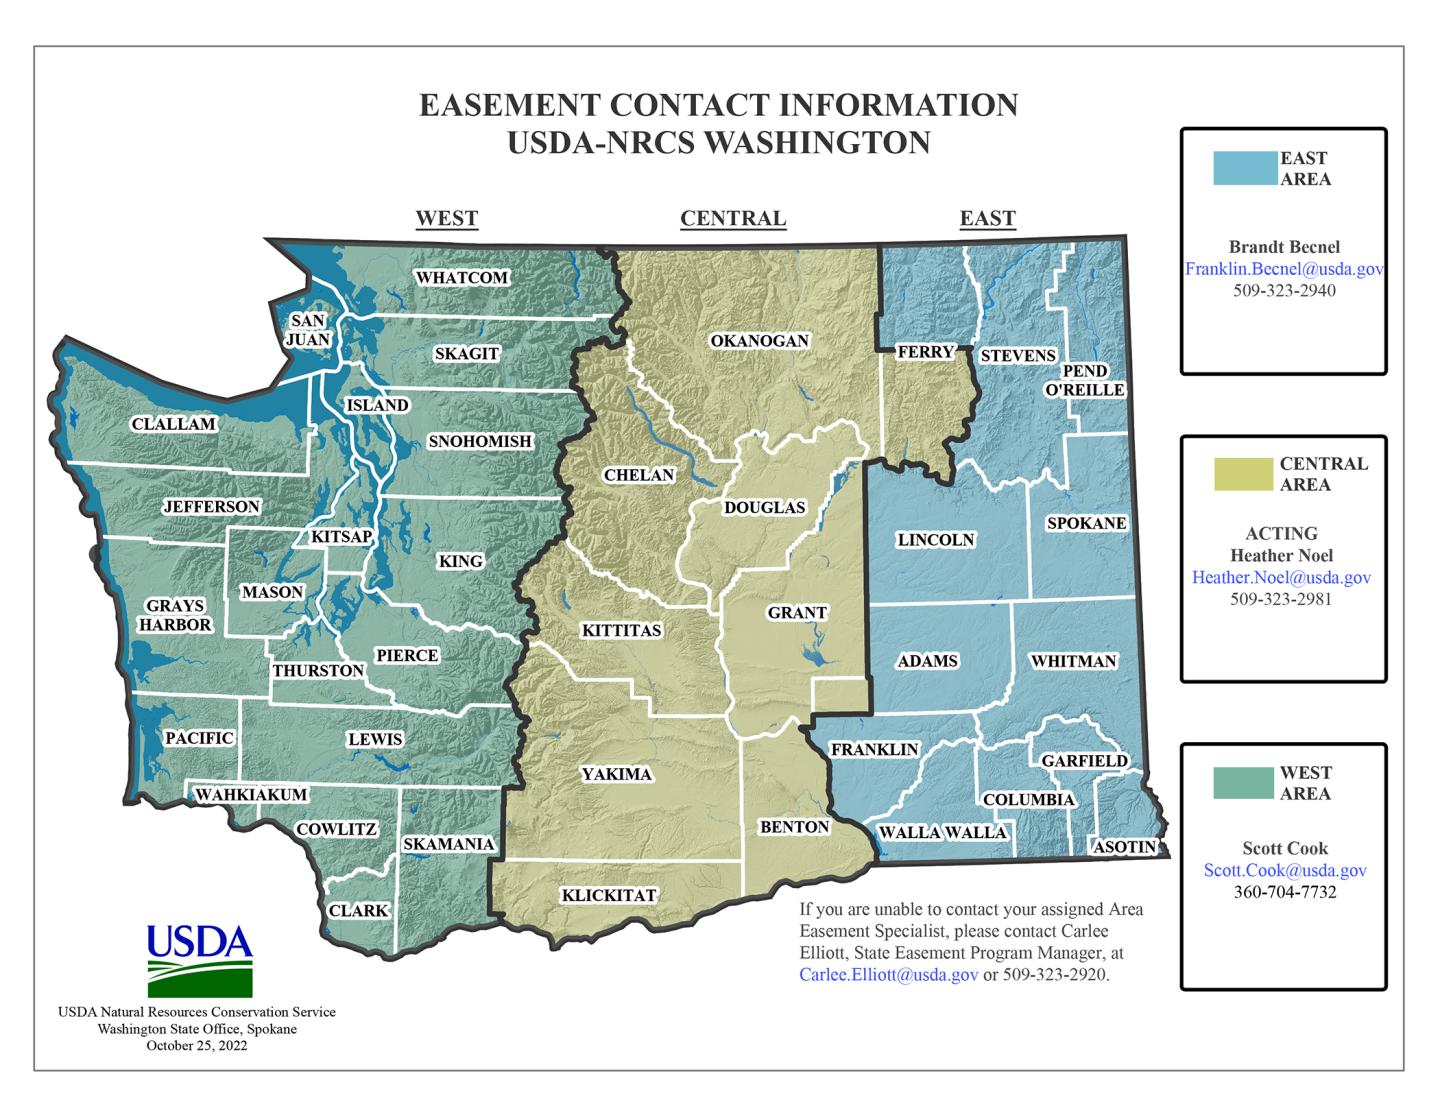 Map of Washington State with easement program contacts